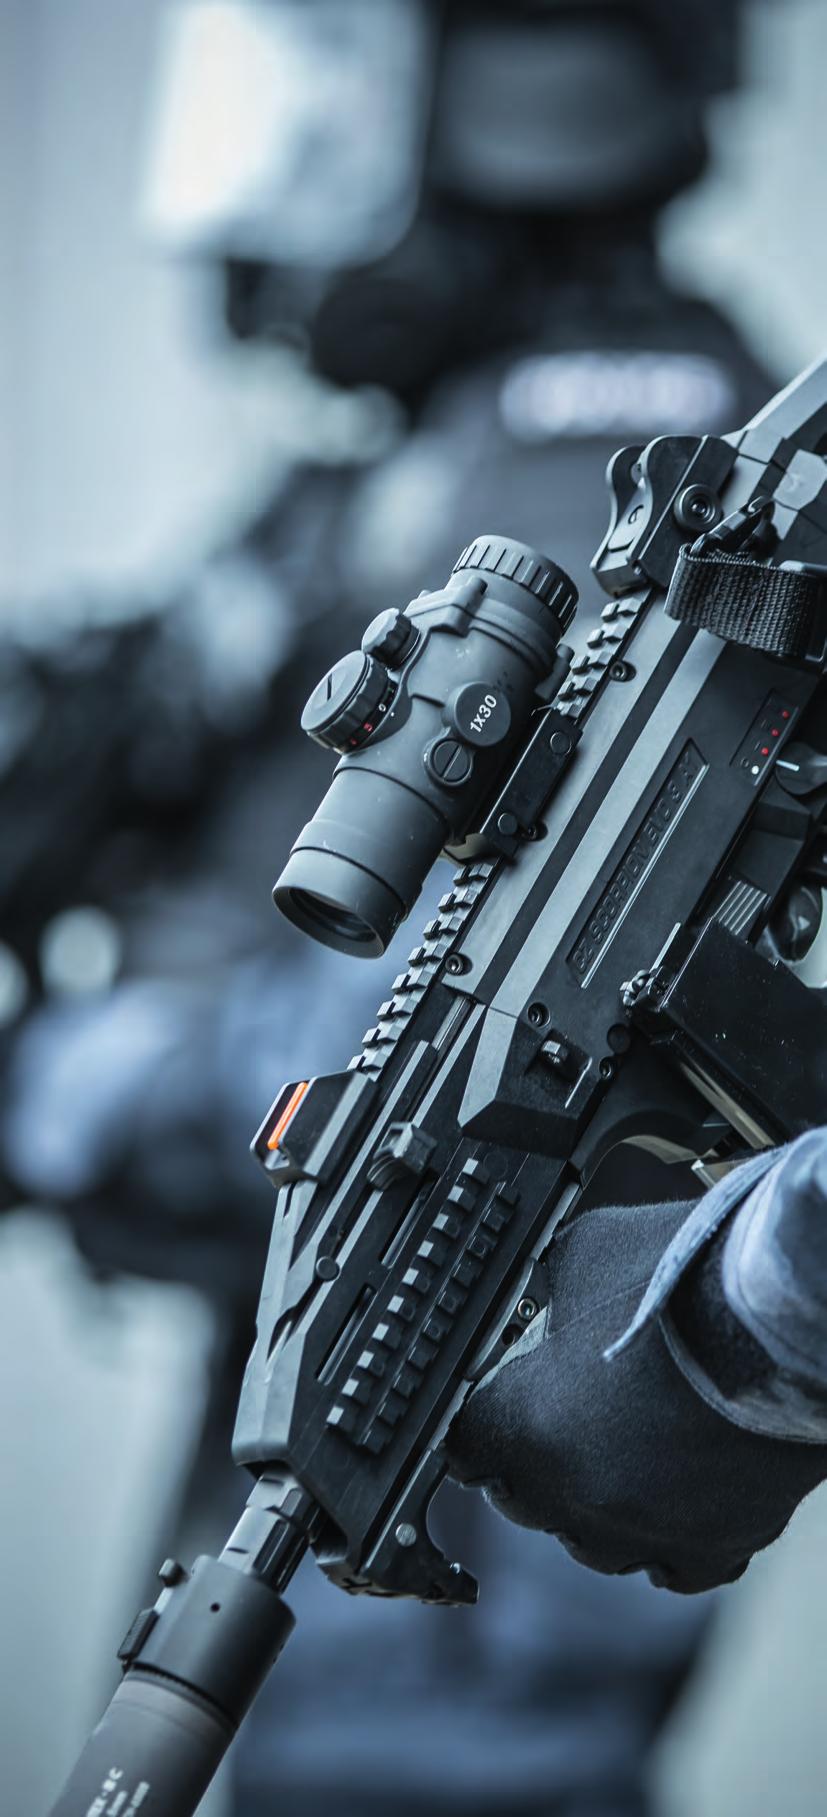 The design of the EVO 3 A1 makes it a very adaptive and versatile platform, giving players the option to add optics, grips and other devices to enhance their Airsoft experience.